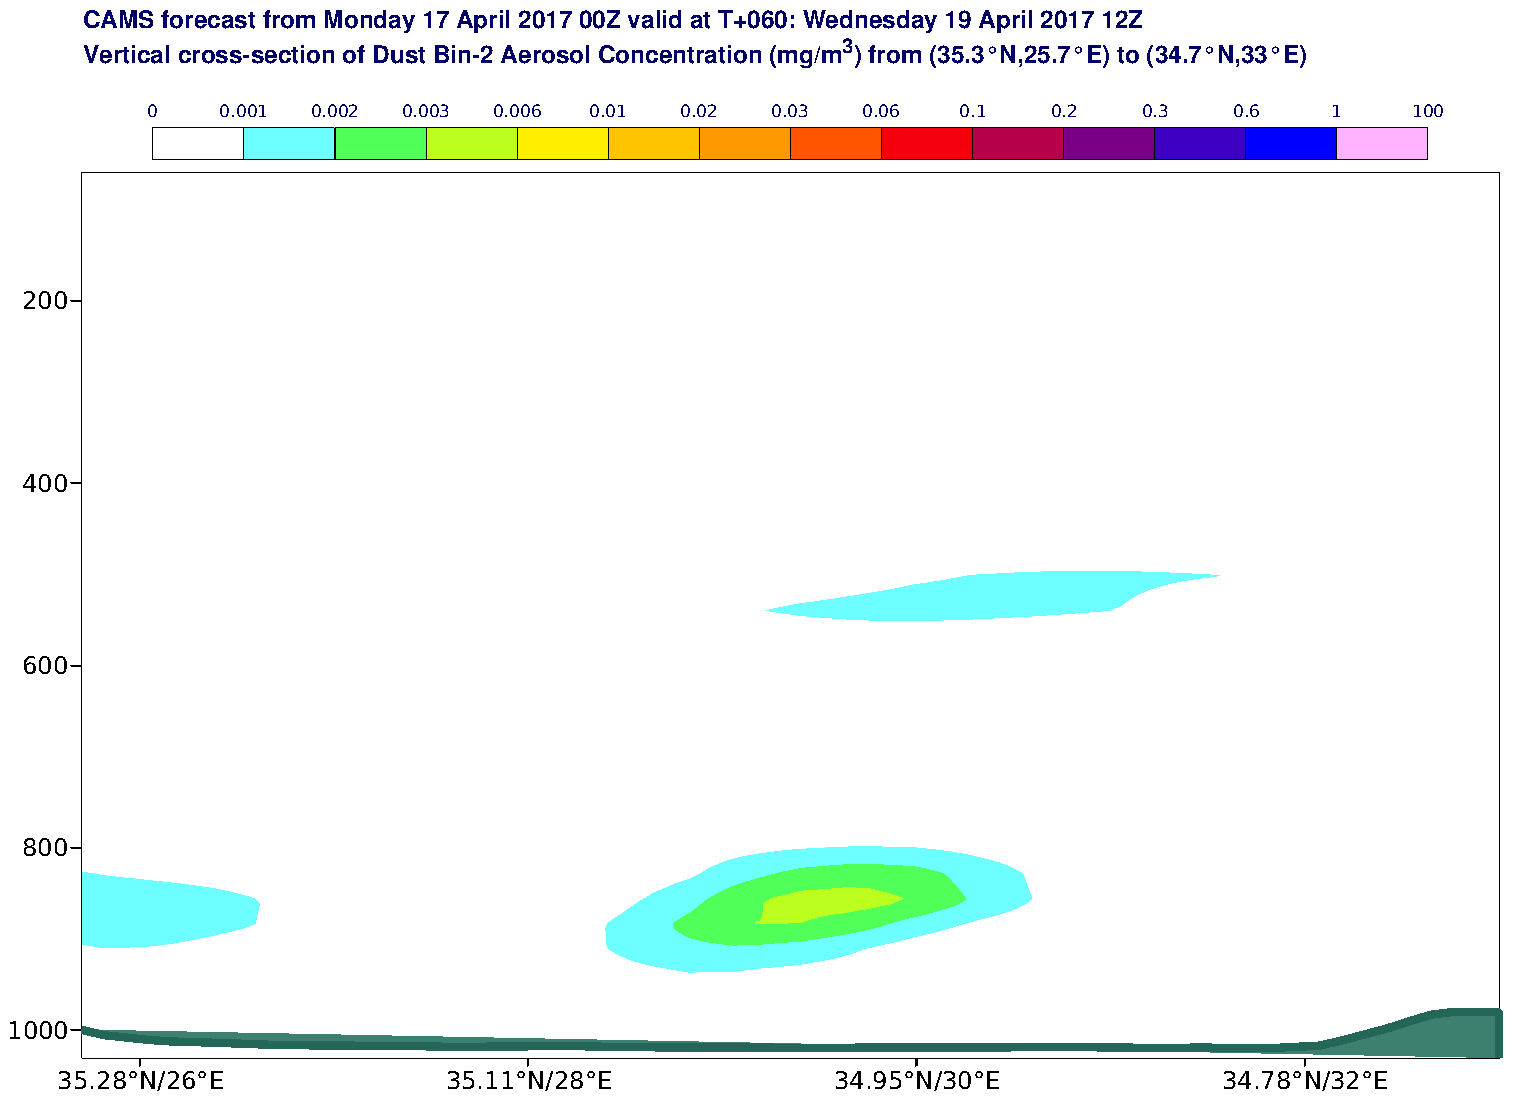 Vertical cross-section of Dust Bin-2 Aerosol Concentration (mg/m3) valid at T60 - 2017-04-19 12:00